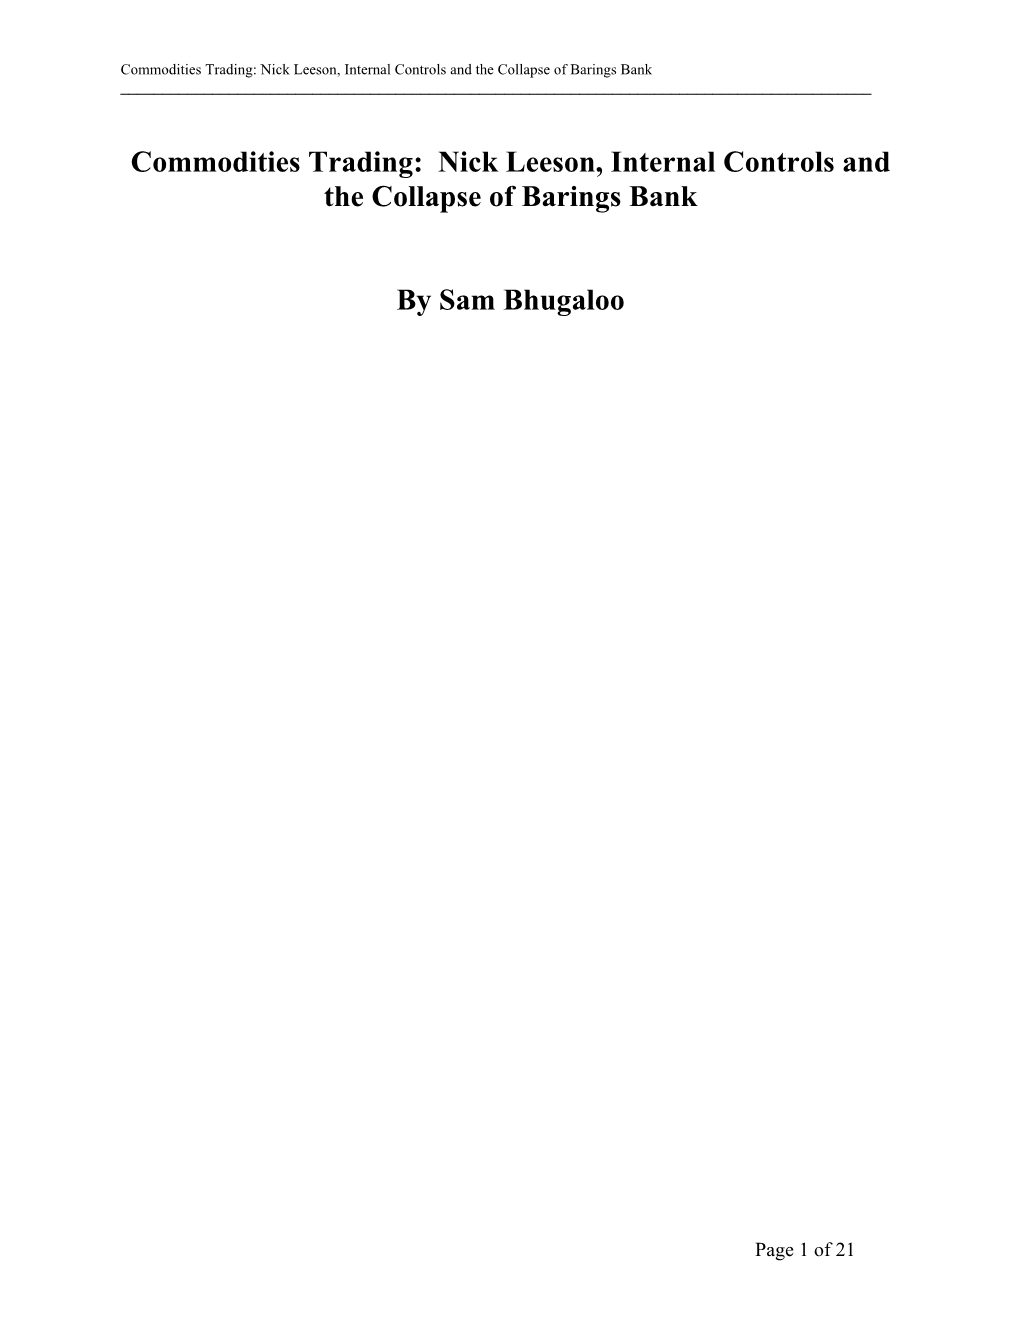 Nick Leeson, Internal Controls and the Collapse of Barings Bank by Sam